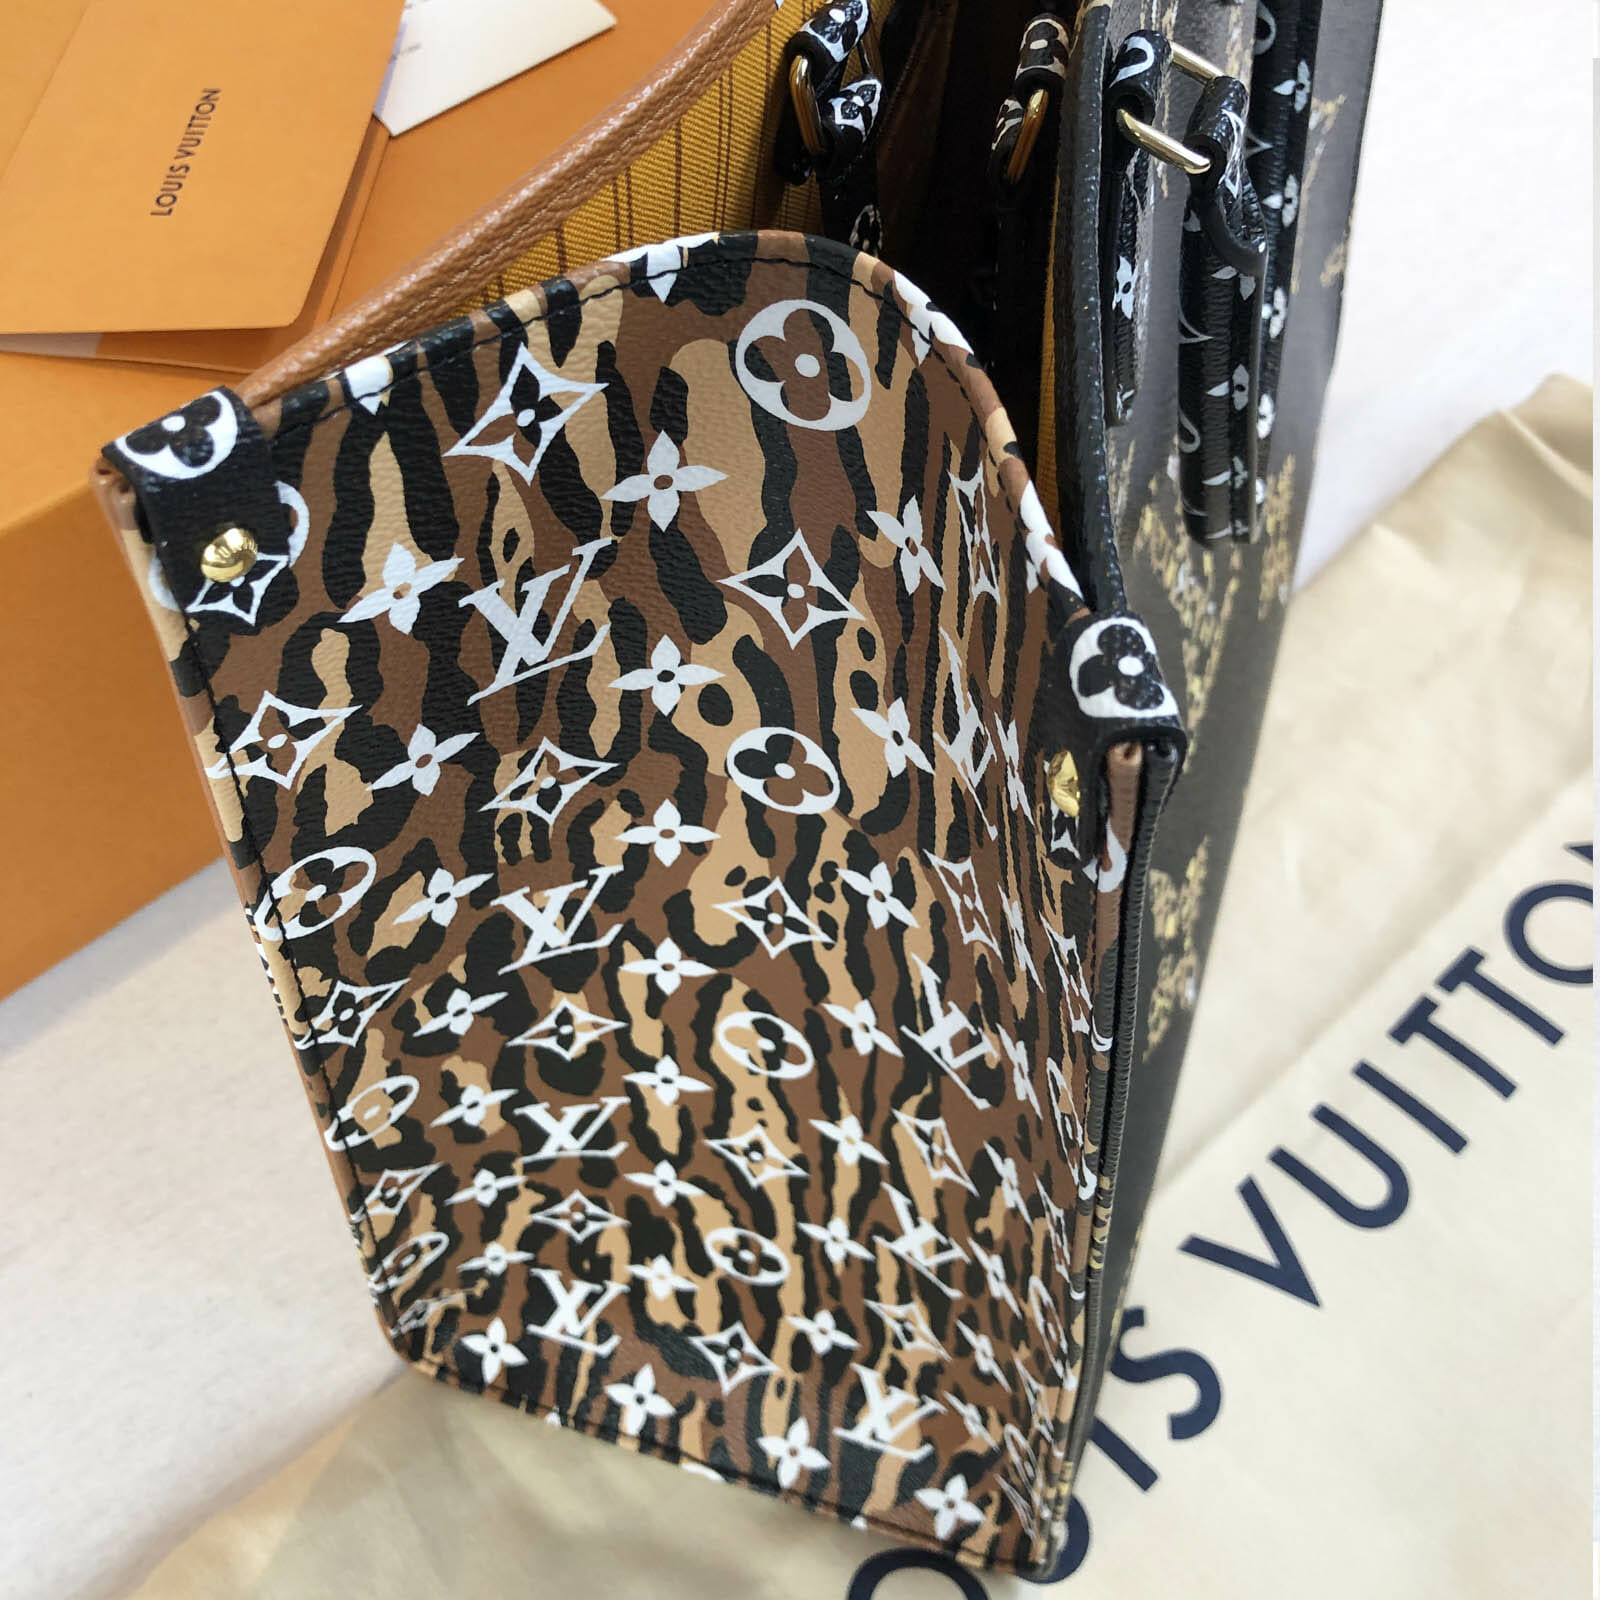 Lv On The Go Bag | English as a Second Language at Rice ...